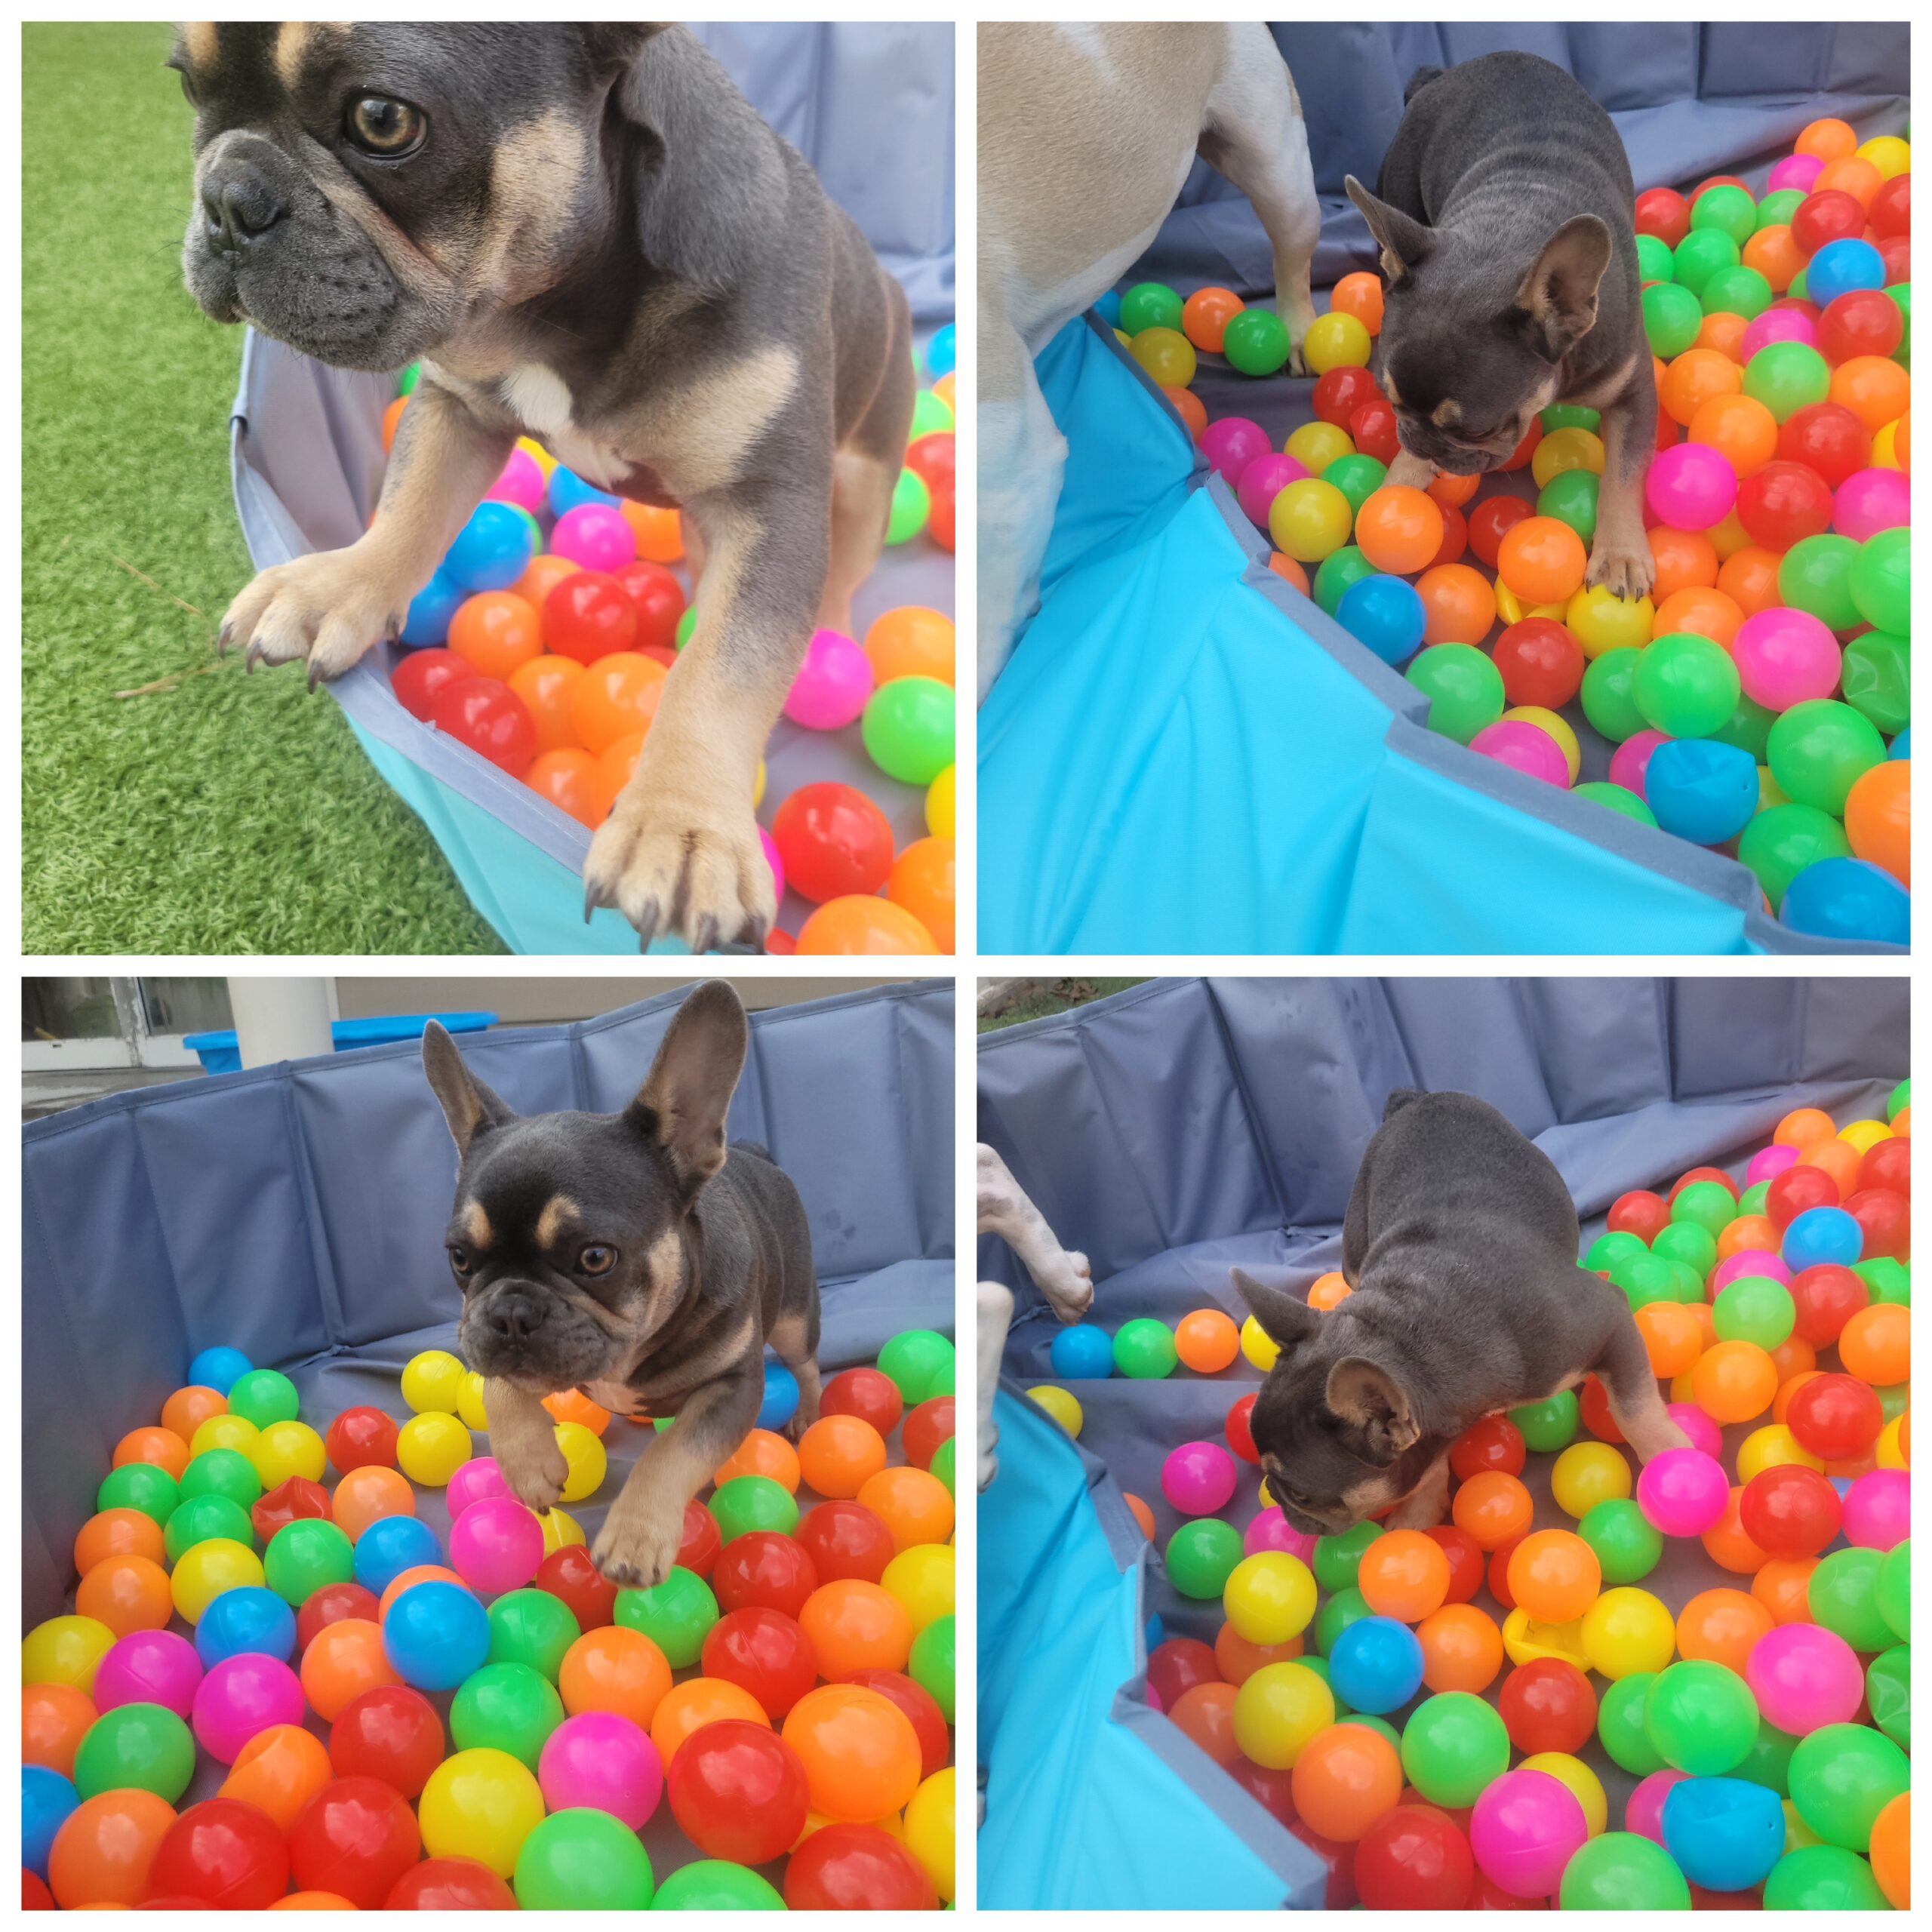 Blu playing in the ball pit